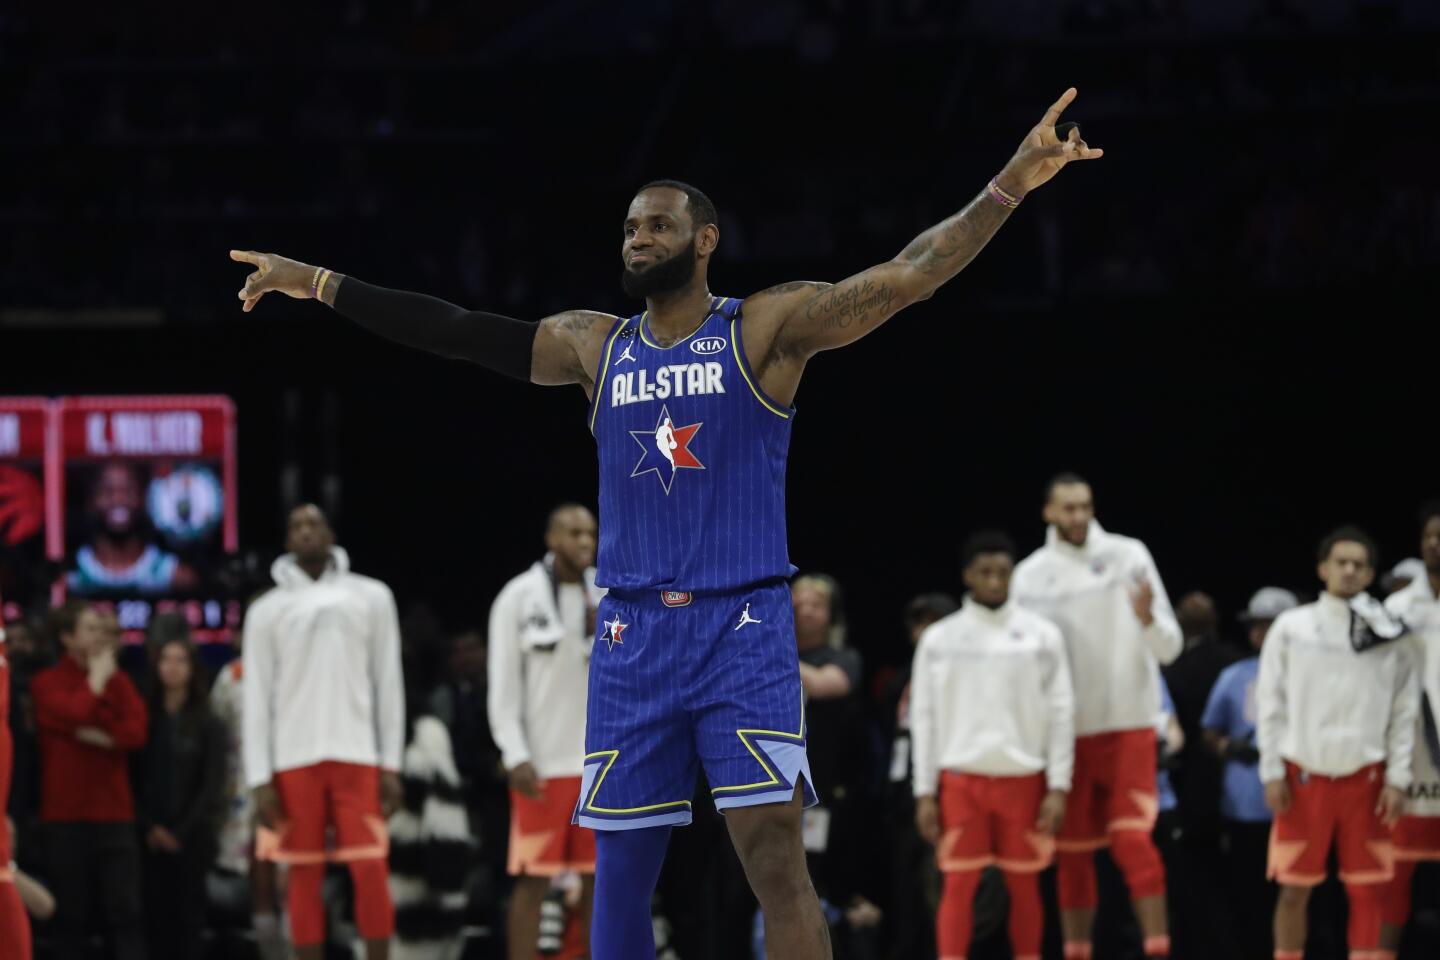 Lakers forward LeBron James celebrates after his team scored during the second half of the NBA All-Star game on Feb. 16, 2020, at the United Center in Chicago.